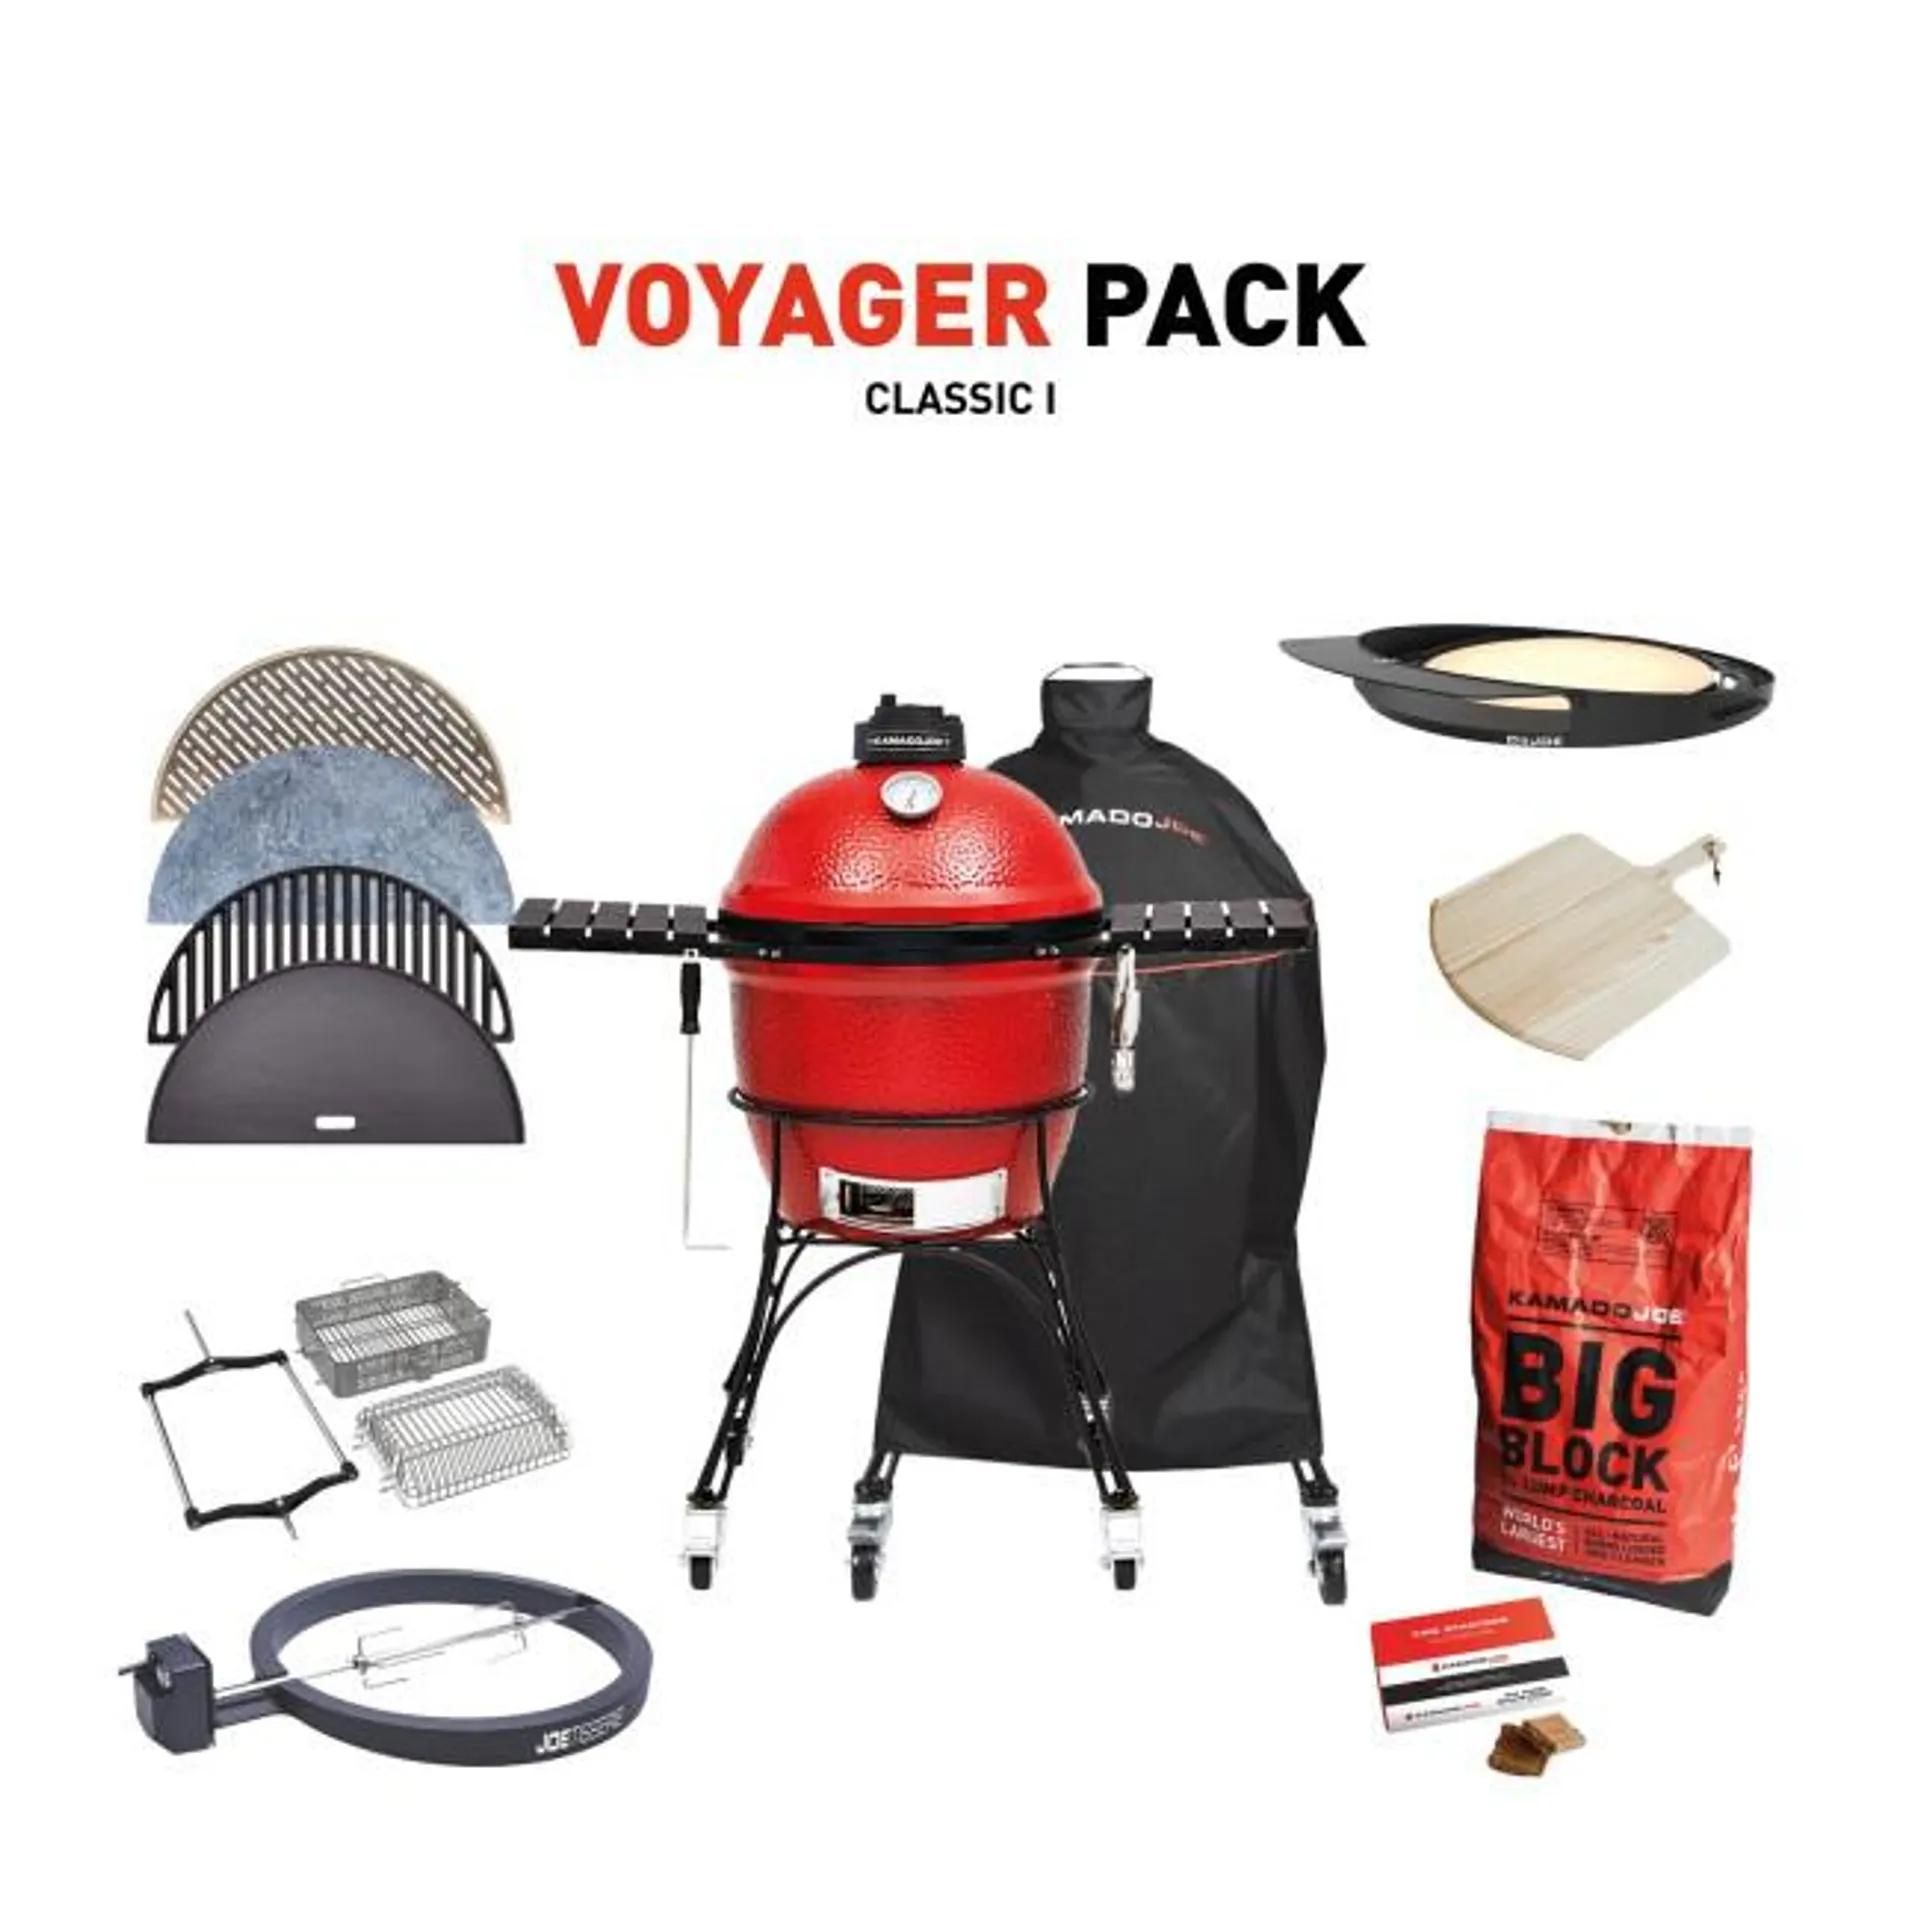 Kamado Joe Classic I with Voyager Pack